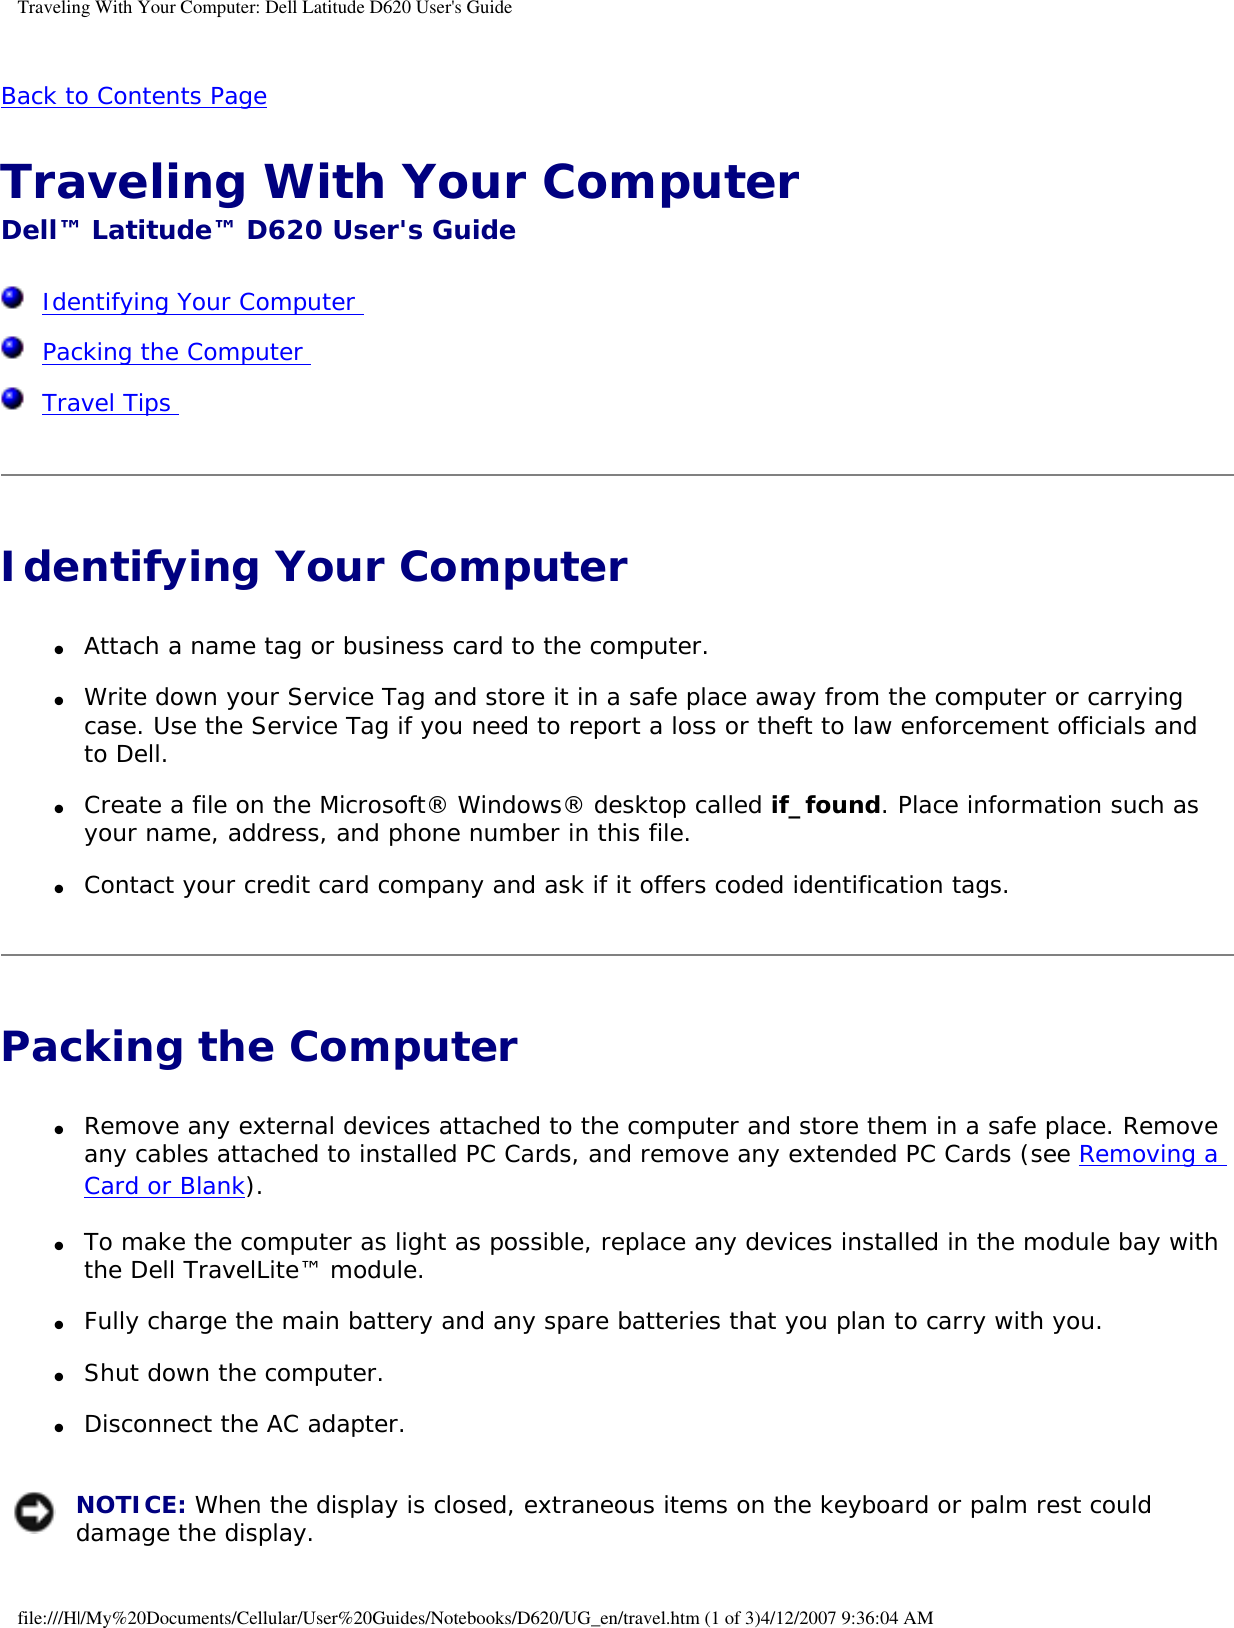 Traveling With Your Computer: Dell Latitude D620 User&apos;s GuideBack to Contents Page Traveling With Your Computer Dell™ Latitude™ D620 User&apos;s Guide  Identifying Your Computer   Packing the Computer   Travel Tips  Identifying Your Computer ●     Attach a name tag or business card to the computer.  ●     Write down your Service Tag and store it in a safe place away from the computer or carrying case. Use the Service Tag if you need to report a loss or theft to law enforcement officials and to Dell.  ●     Create a file on the Microsoft® Windows® desktop called if_found. Place information such as your name, address, and phone number in this file.  ●     Contact your credit card company and ask if it offers coded identification tags.  Packing the Computer ●     Remove any external devices attached to the computer and store them in a safe place. Remove any cables attached to installed PC Cards, and remove any extended PC Cards (see Removing a Card or Blank).  ●     To make the computer as light as possible, replace any devices installed in the module bay with the Dell TravelLite™ module.  ●     Fully charge the main battery and any spare batteries that you plan to carry with you.  ●     Shut down the computer.  ●     Disconnect the AC adapter.   NOTICE: When the display is closed, extraneous items on the keyboard or palm rest could damage the display.file:///H|/My%20Documents/Cellular/User%20Guides/Notebooks/D620/UG_en/travel.htm (1 of 3)4/12/2007 9:36:04 AM